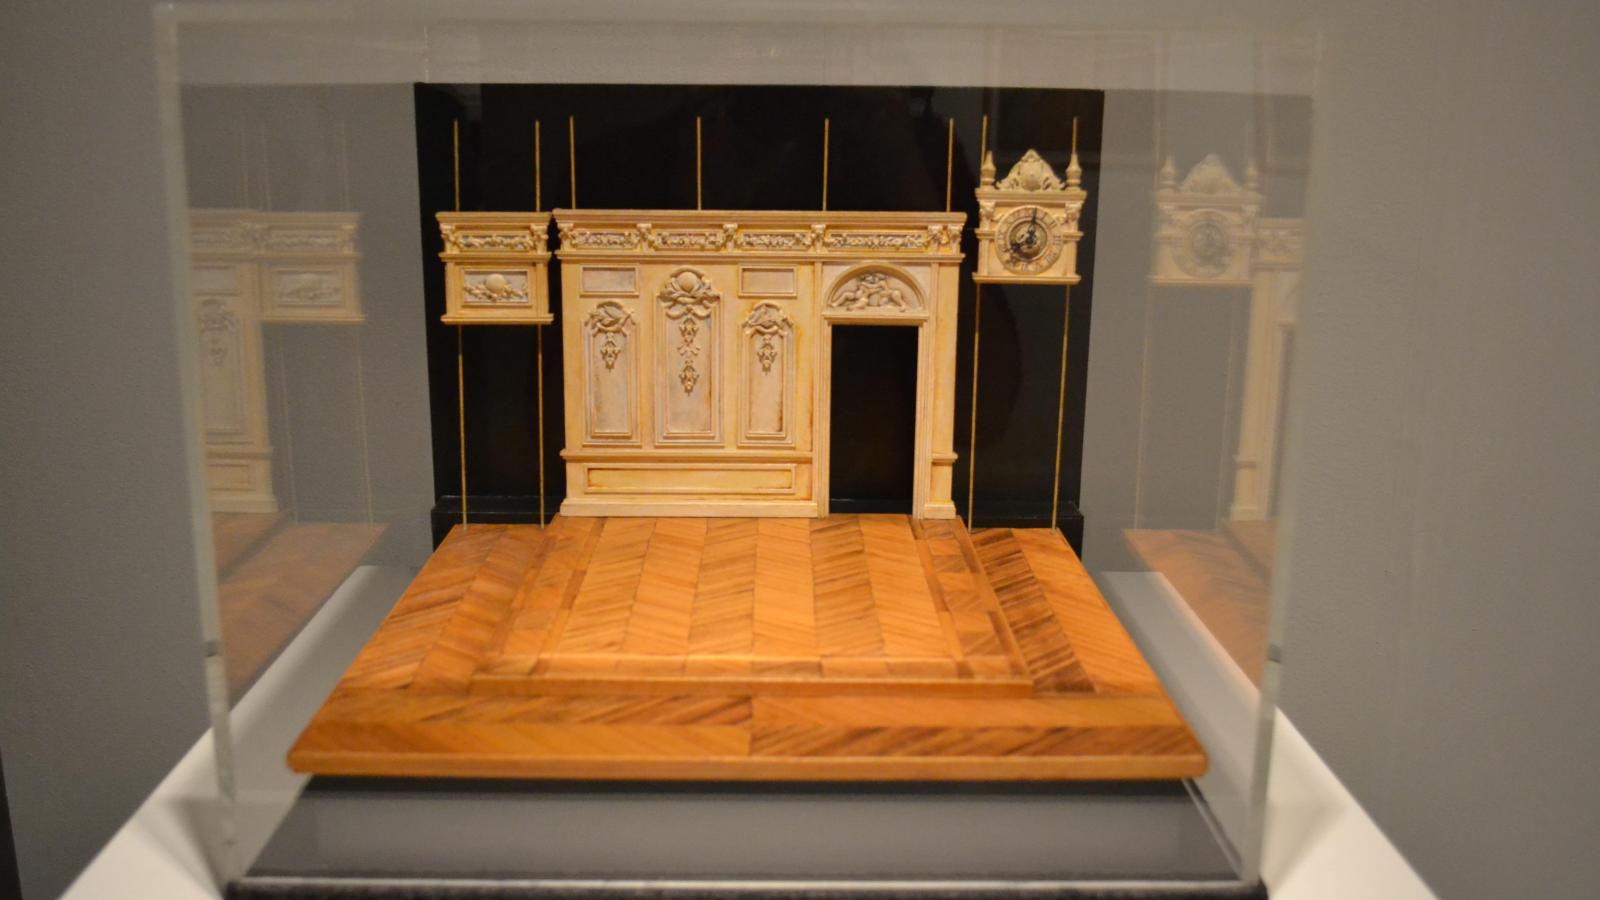 Image of Tony Straiges: "Hall with Clock," set design model for Ivona, Princess of Burgundia, Adelphi College, New York. Tony Straiges Design Collection. The Jerome Lawrence and Robert E. Lee Theatre Research Institute. 1974